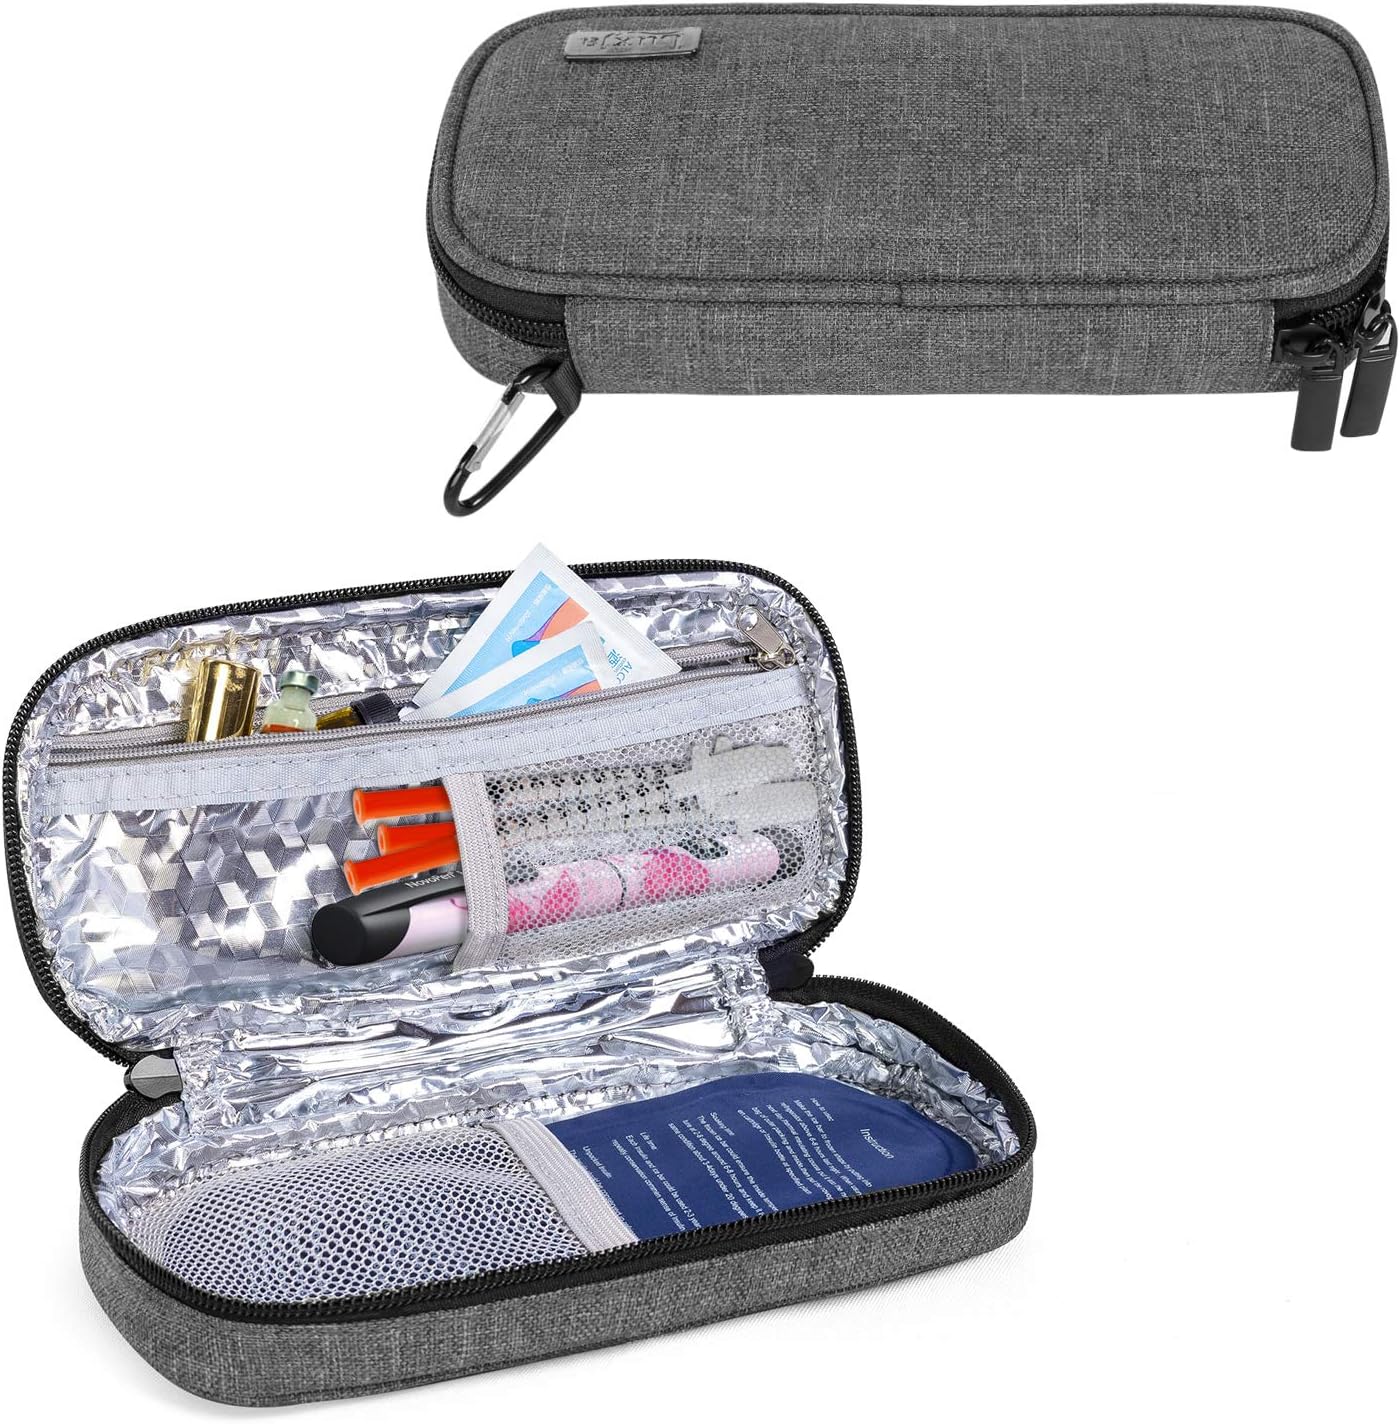 Luxja Insulin Travel Case, Insulin Bag for Insulin Pens and Other Diabetic Supplies (Bag Only), Gray